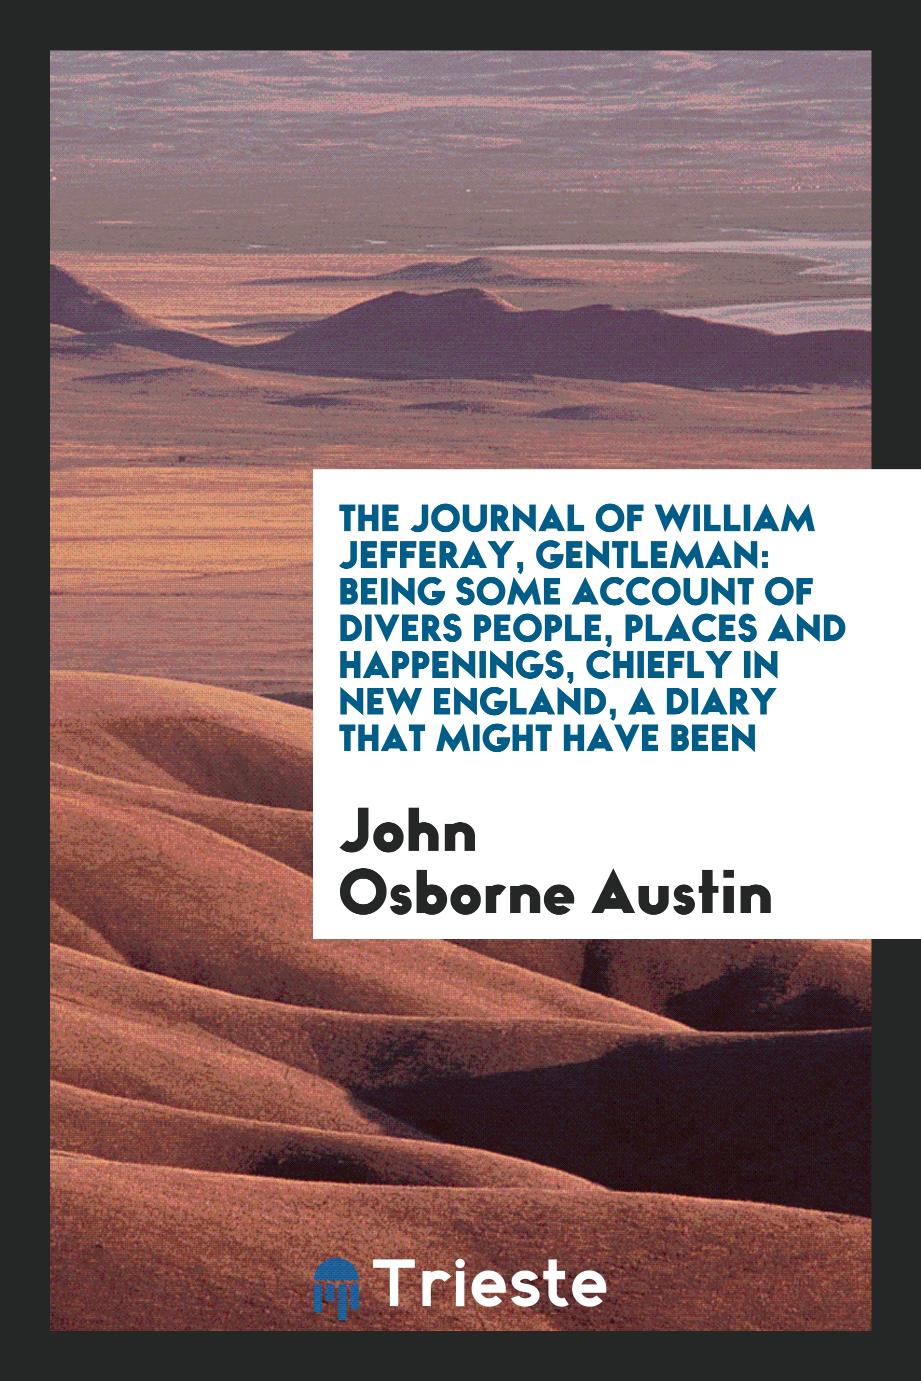 The journal of William Jefferay, Gentleman: being some account of divers people, places and happenings, chiefly in New England, a diary that might have been